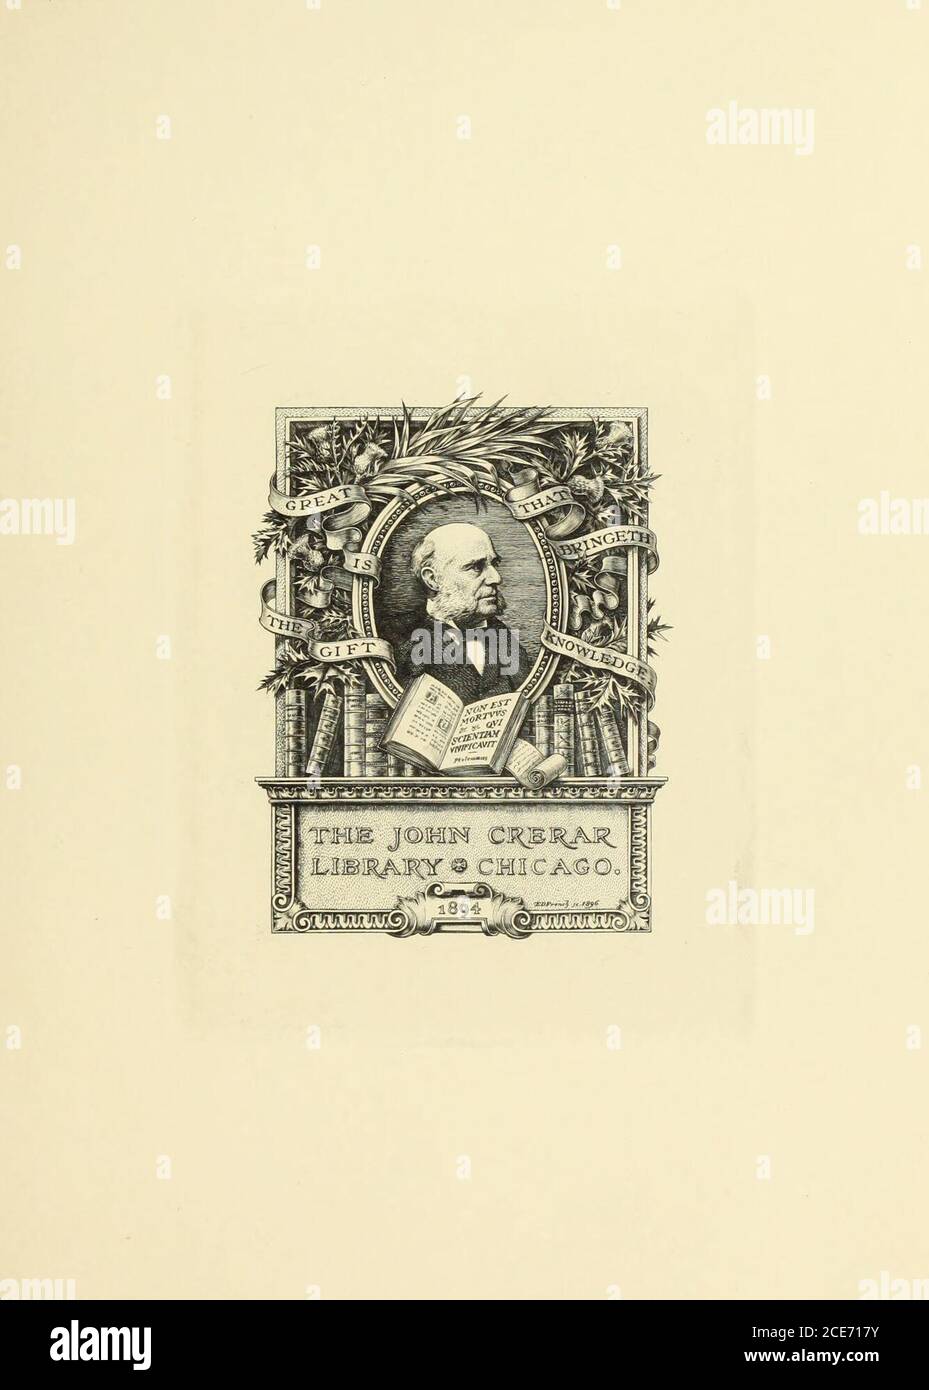 . Artists and engravers of British and American book plates : a book of reference for book plate and print collectors . French fc French, 1895French sc. 1895French sc. 1896 E. D. French sc. E. D.E. D. E. D.E. D. French, 1896.French sc. 1895 French 1896French sc. 189? E. D. F. E. D. F sc. 1894 E. D. F. sc. 1894, H. Pyle E. D. French sc. 1896 E. D. French sc. 1895.E. D. French sc. 1894 E. D. French 1894E. D. F. E. D. French fee*. 1896E D French sc 1895 Style Pictorial PictorialPictorial Library Int.Library Int.Portrait Pictorial Library Int. Decorative Pictorial Pictorial Pictorial Decorative Pi Stock Photo